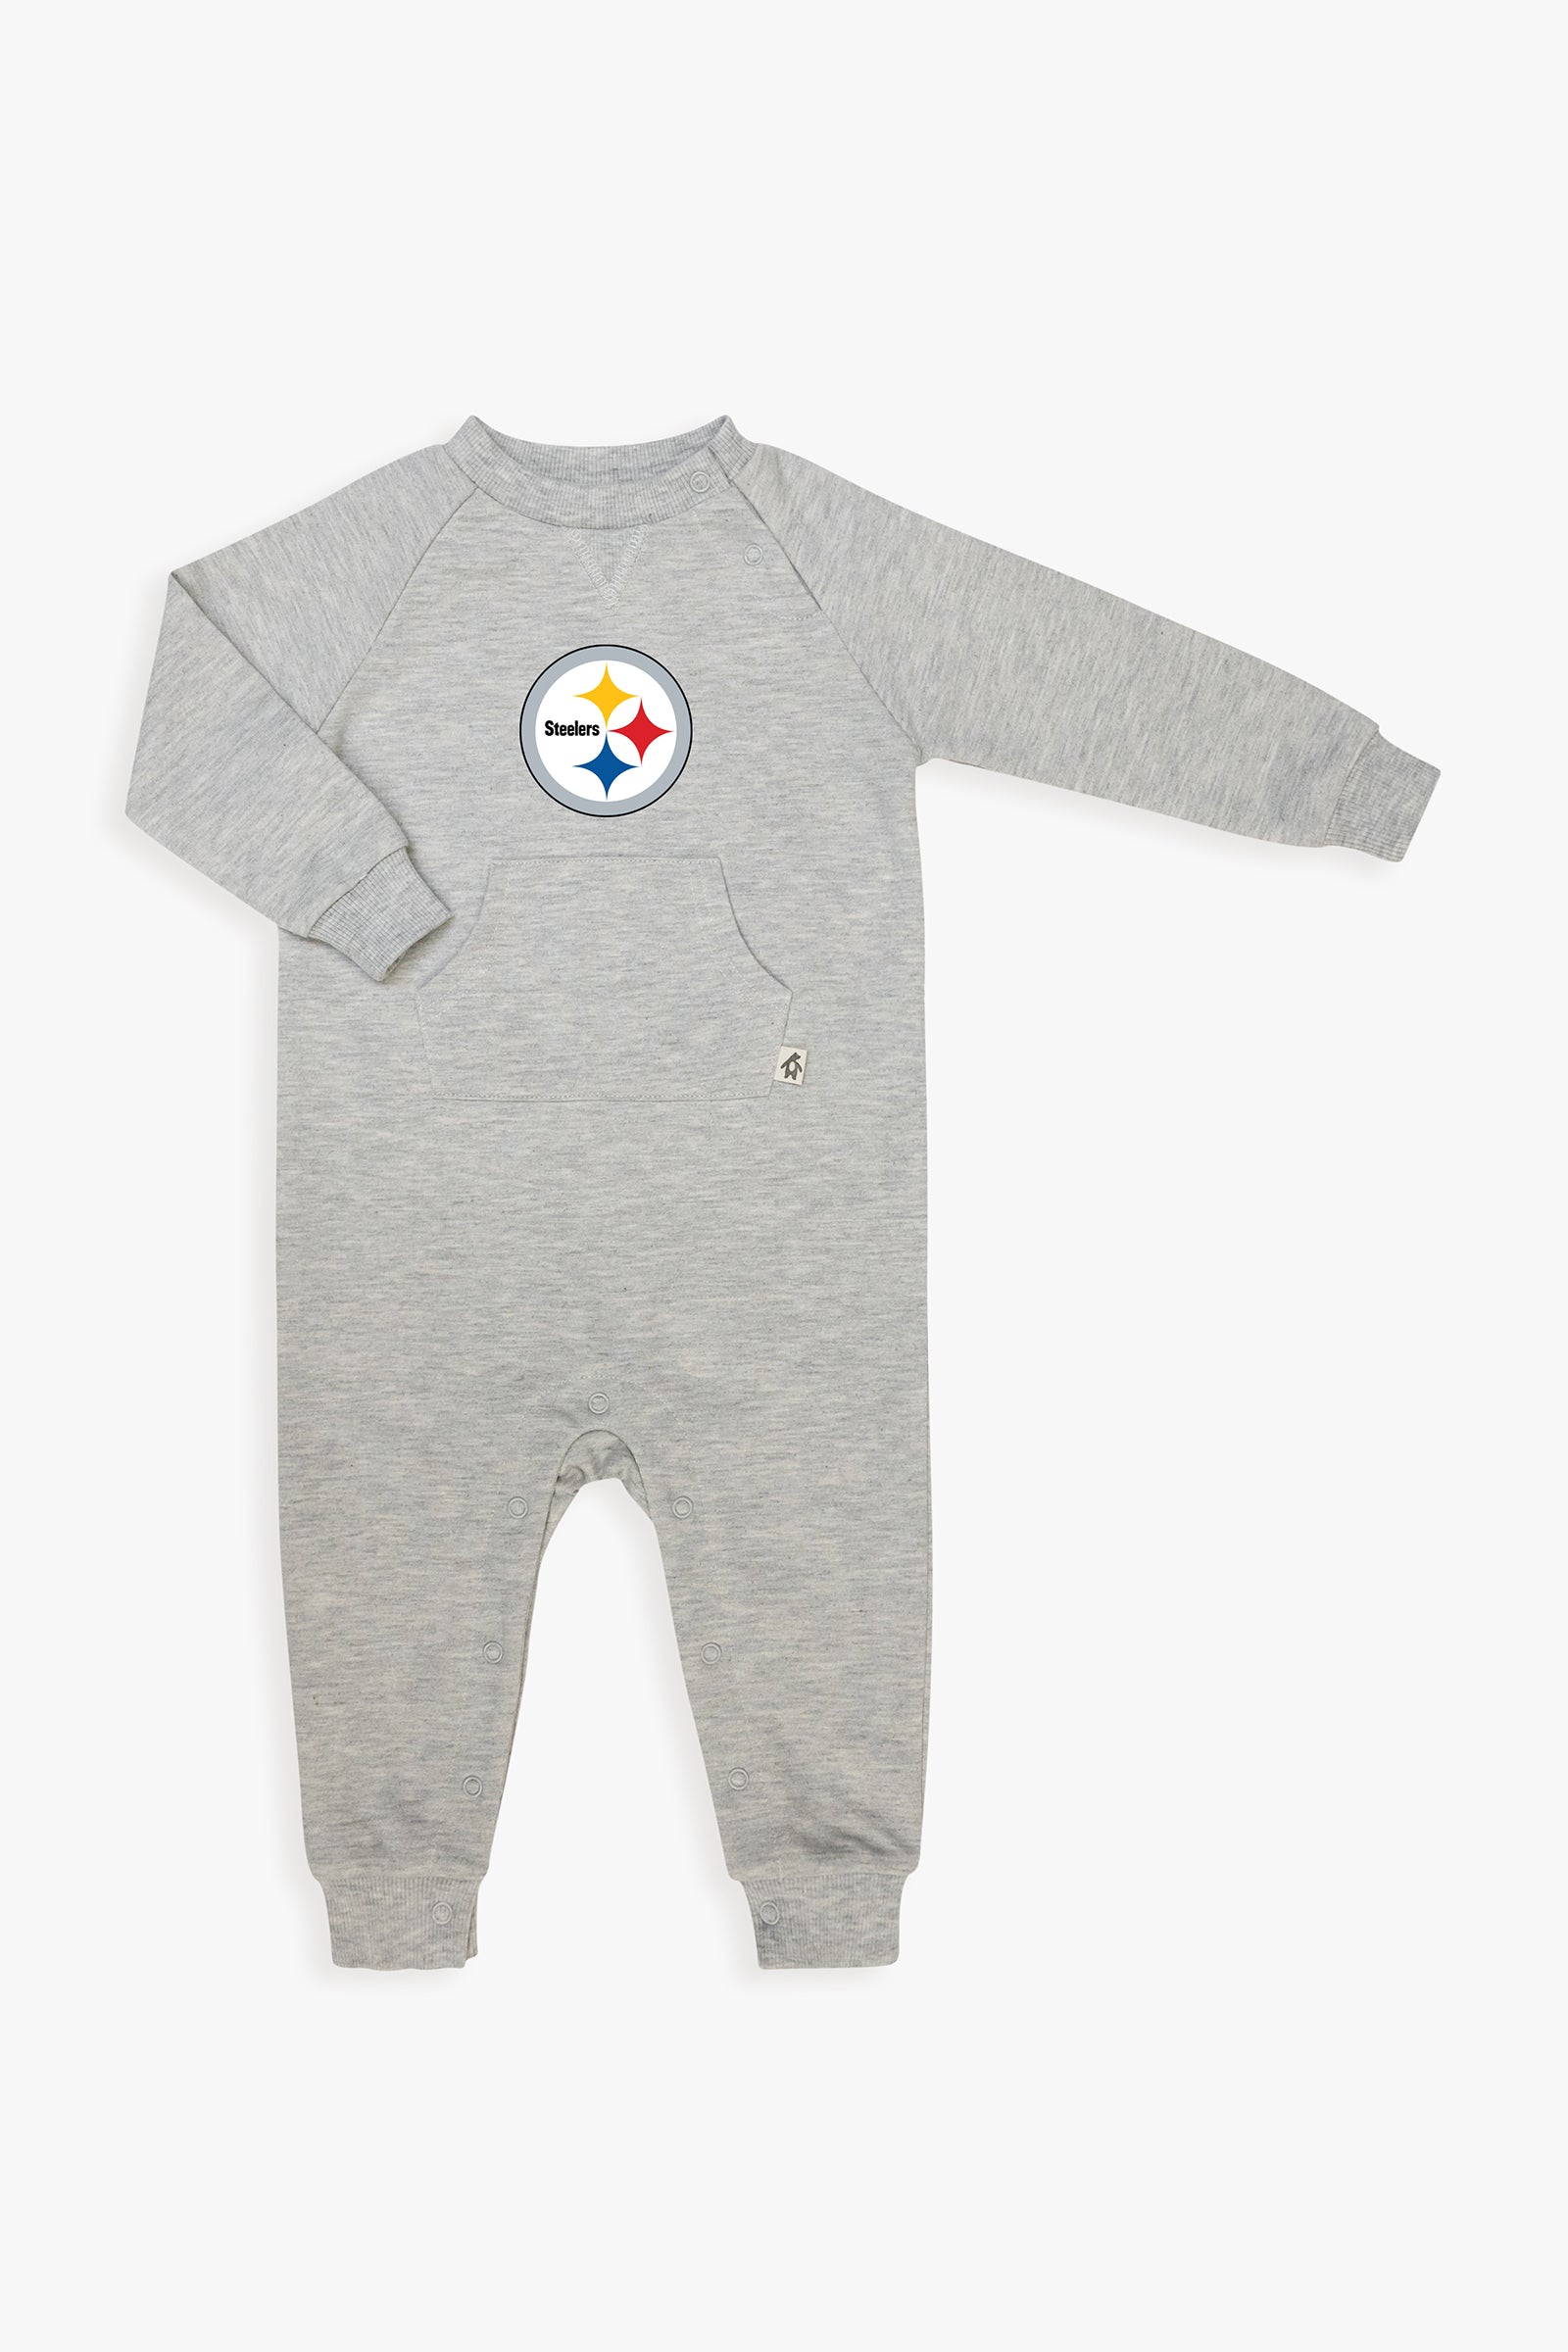 Gertex NFL Baby French Terry Jumpsuit in Grey